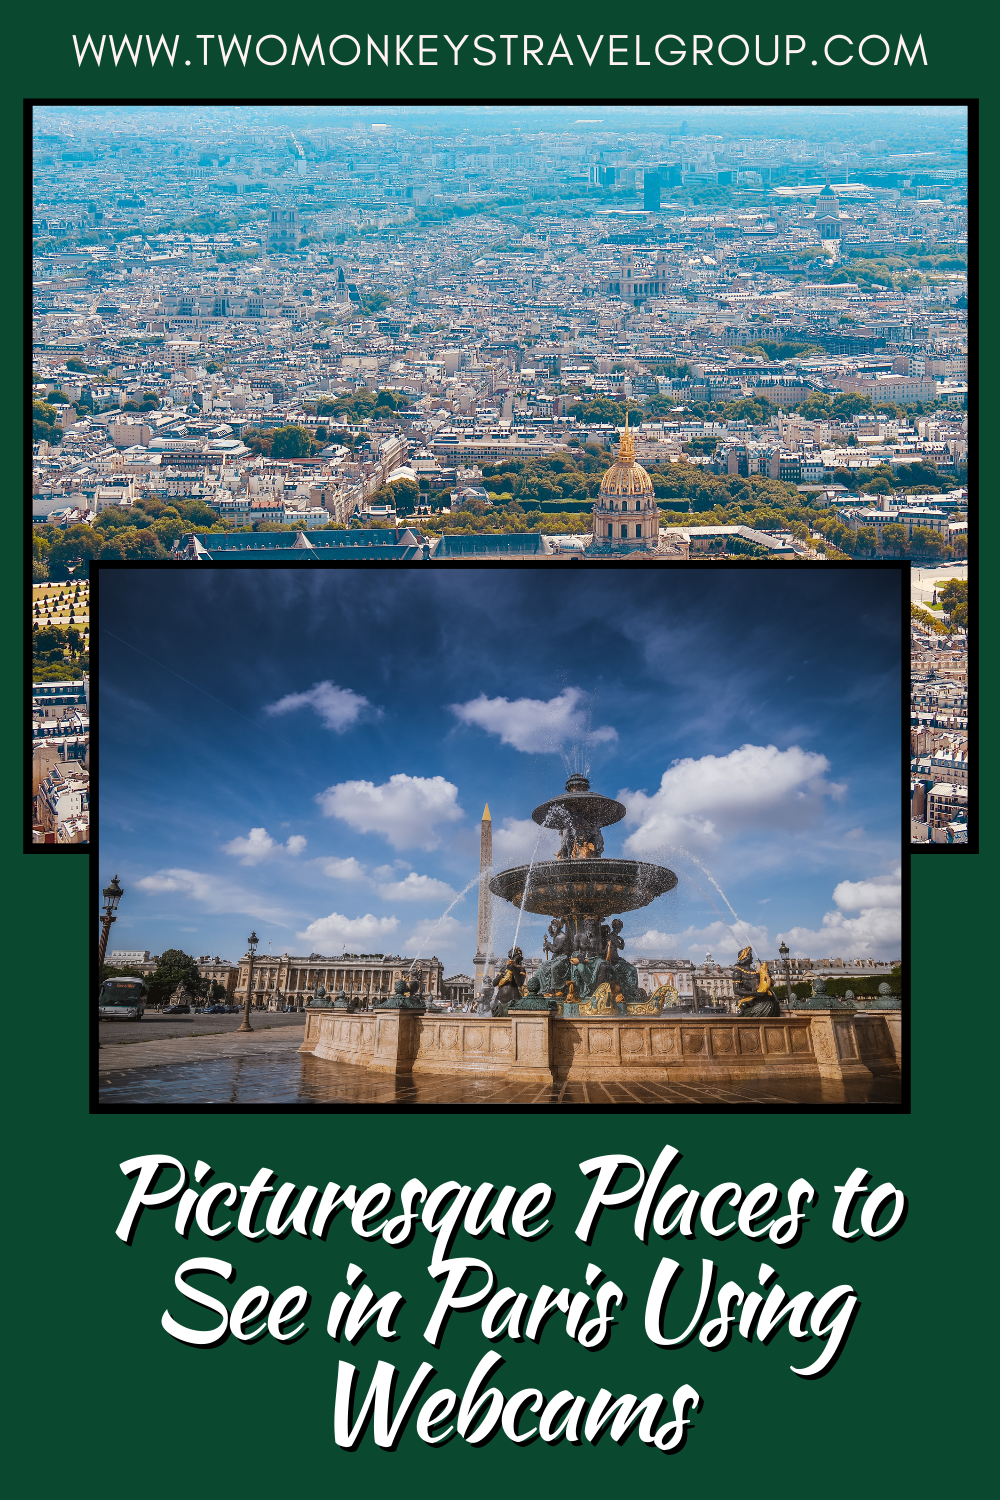 10 Picturesque Places to See in Paris Using Webcams